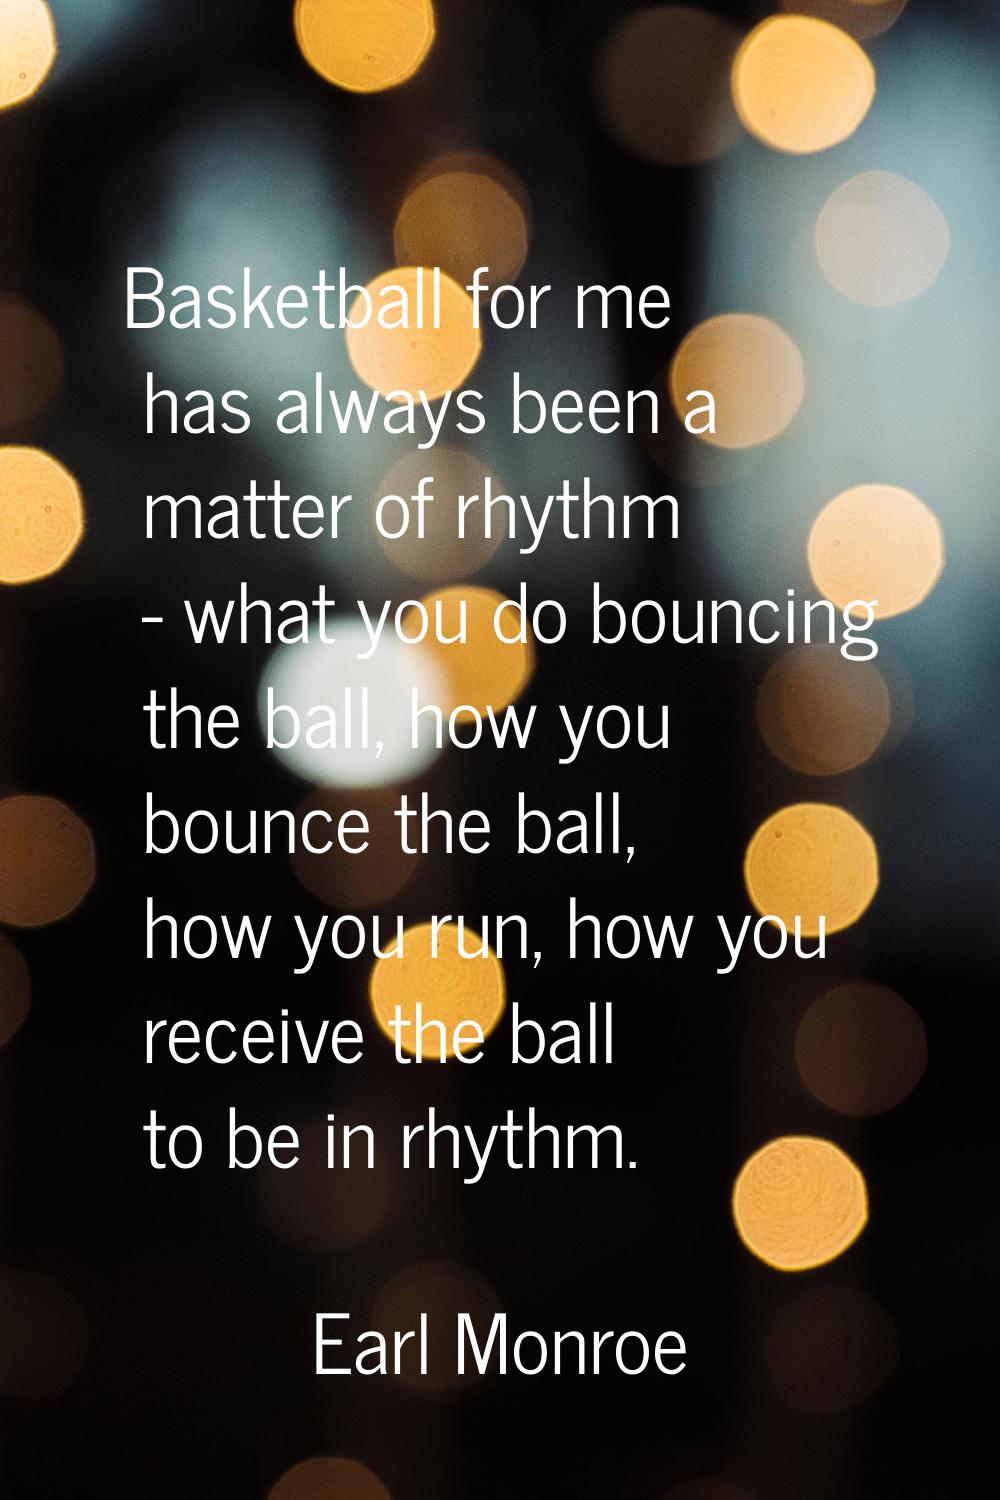 Basketball for me has always been a matter of rhythm - what you do bouncing the ball, how you bounc